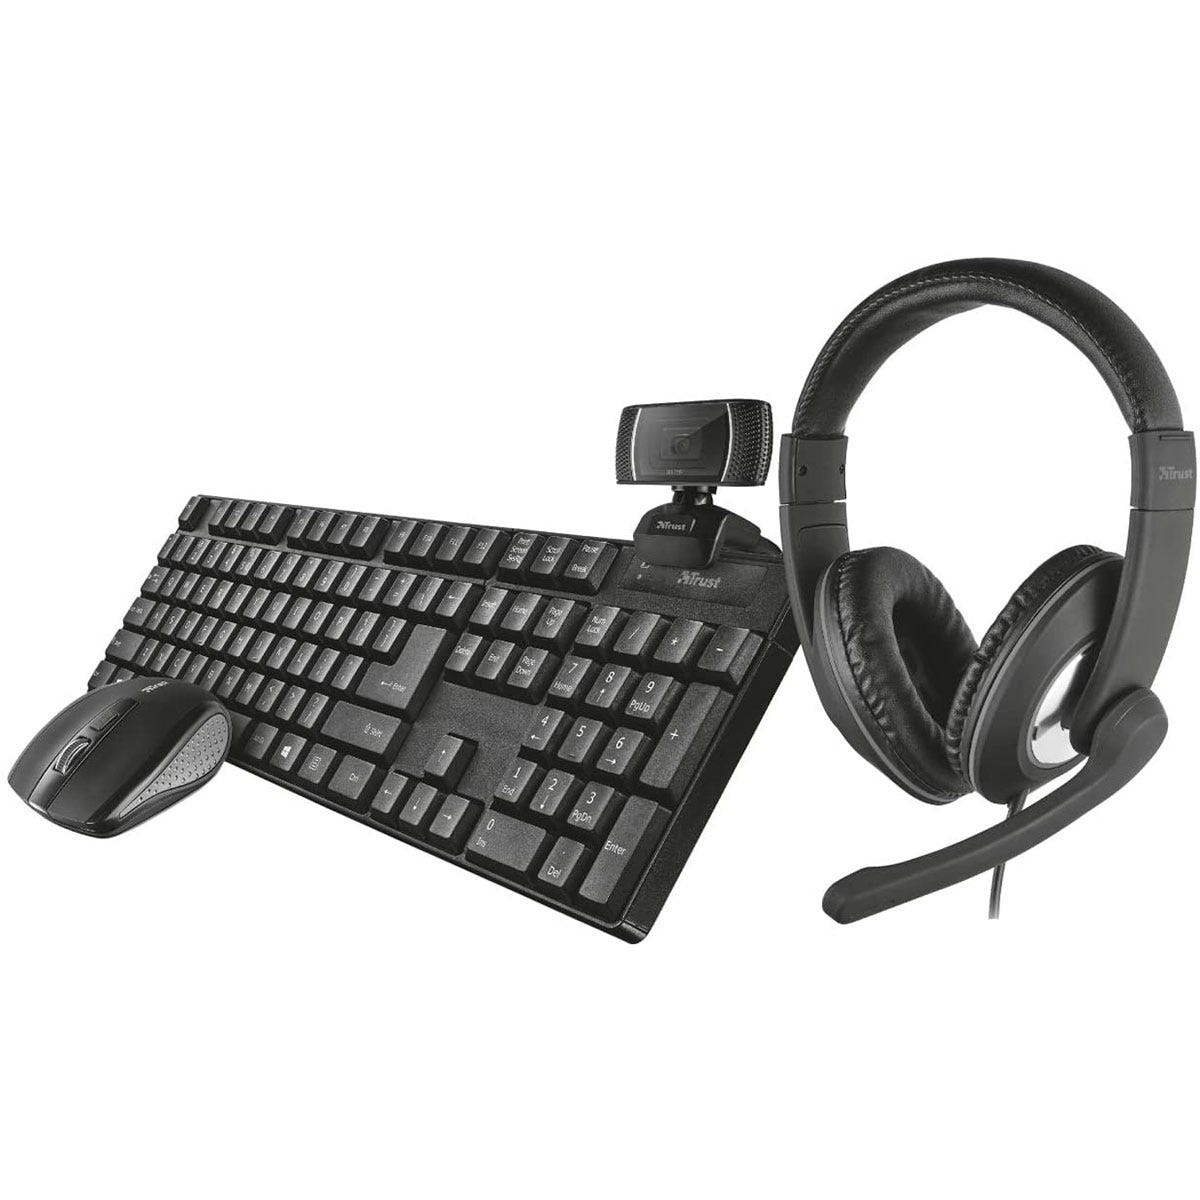 Trust Qoby 4-in-1 Home Office Set with Wireless Keyboard, Wireless Compact Mouse, HD Webcam & Over-Ear Headset - Black